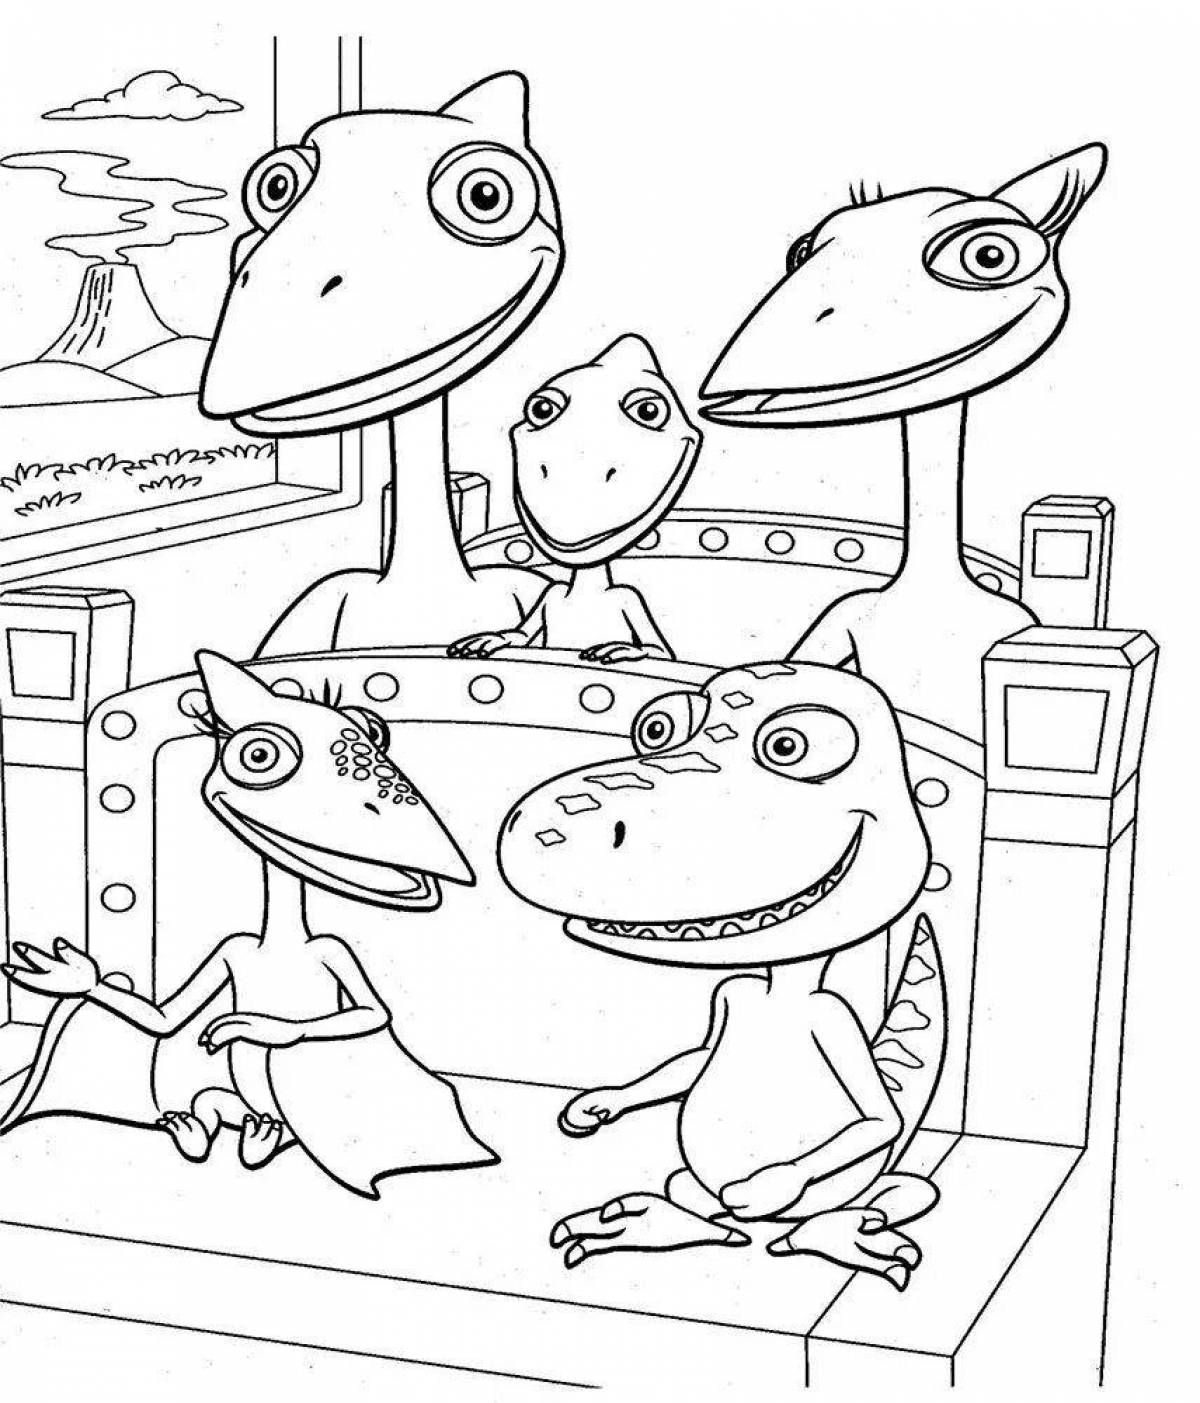 Buddy's funny coloring book